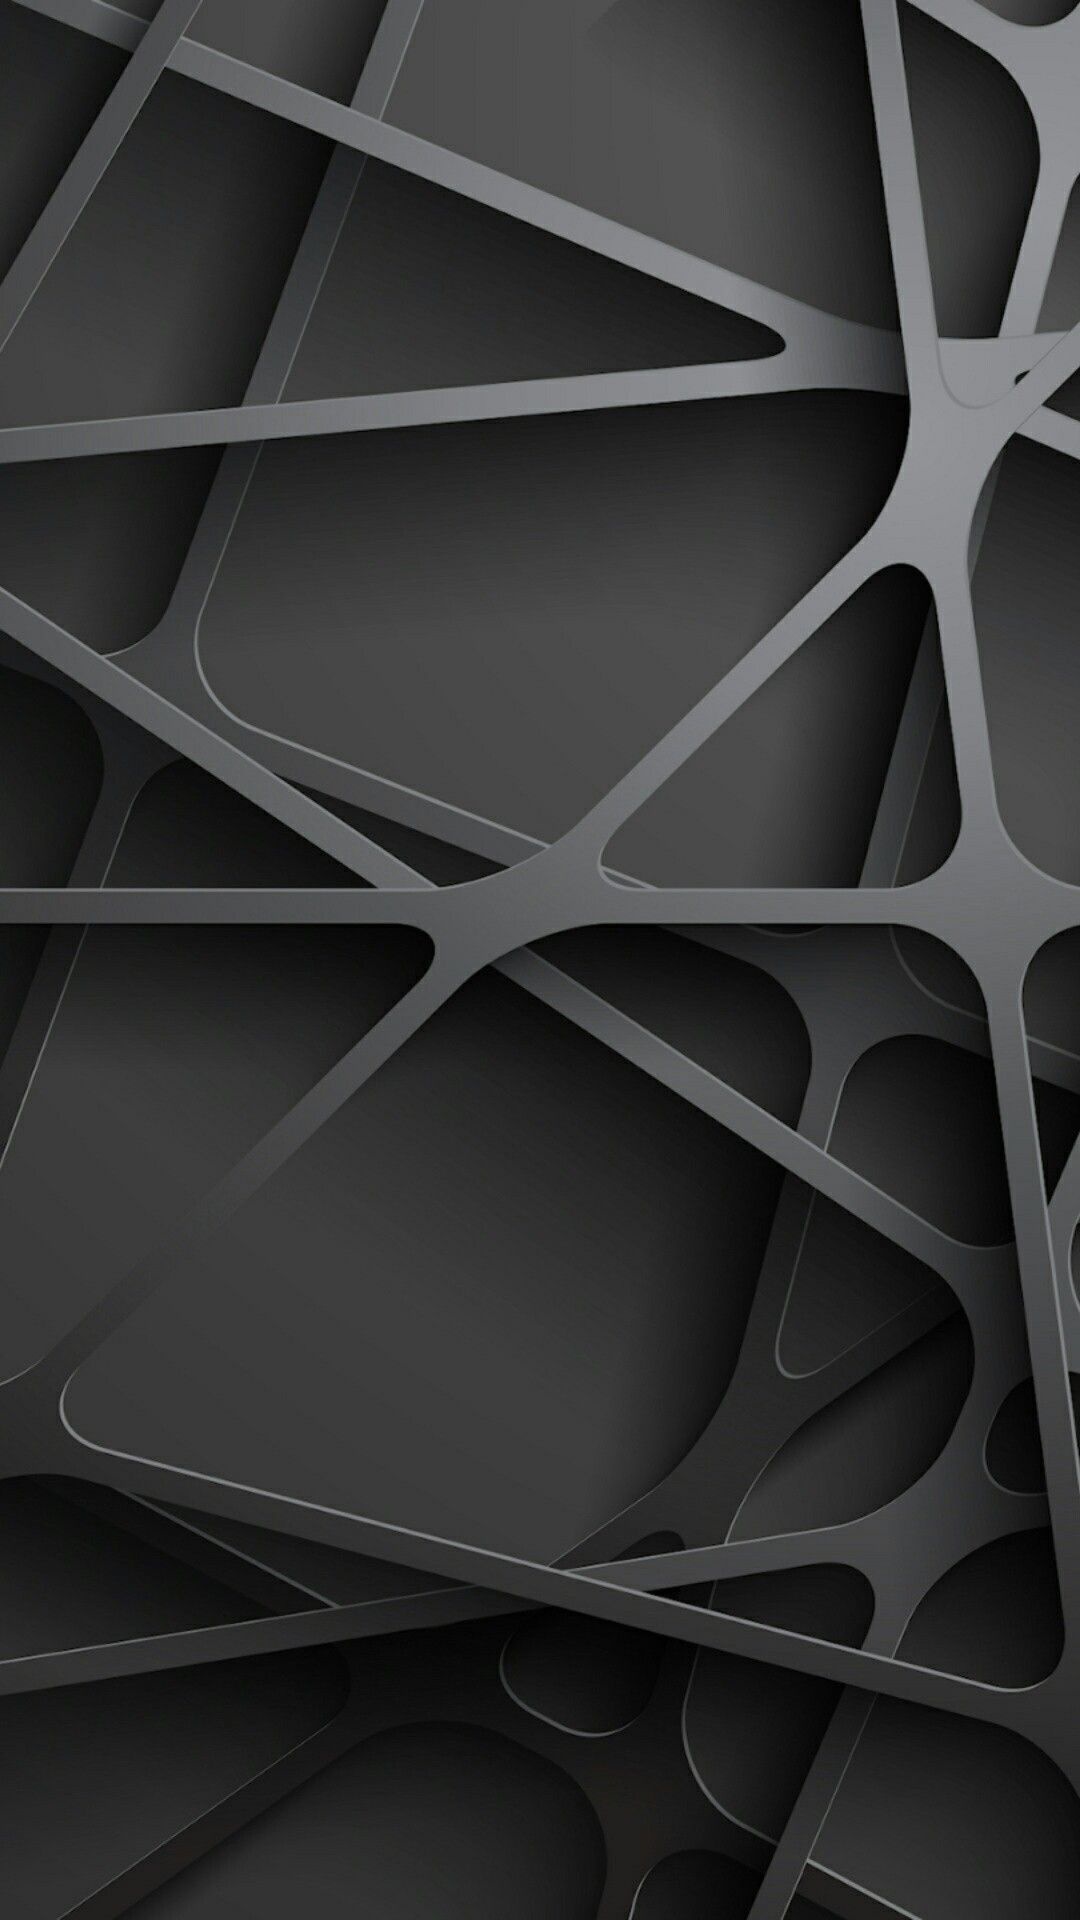 Gray Slate: Abstract, Cellular structure, Intersecting stripes. 1080x1920 Full HD Wallpaper.